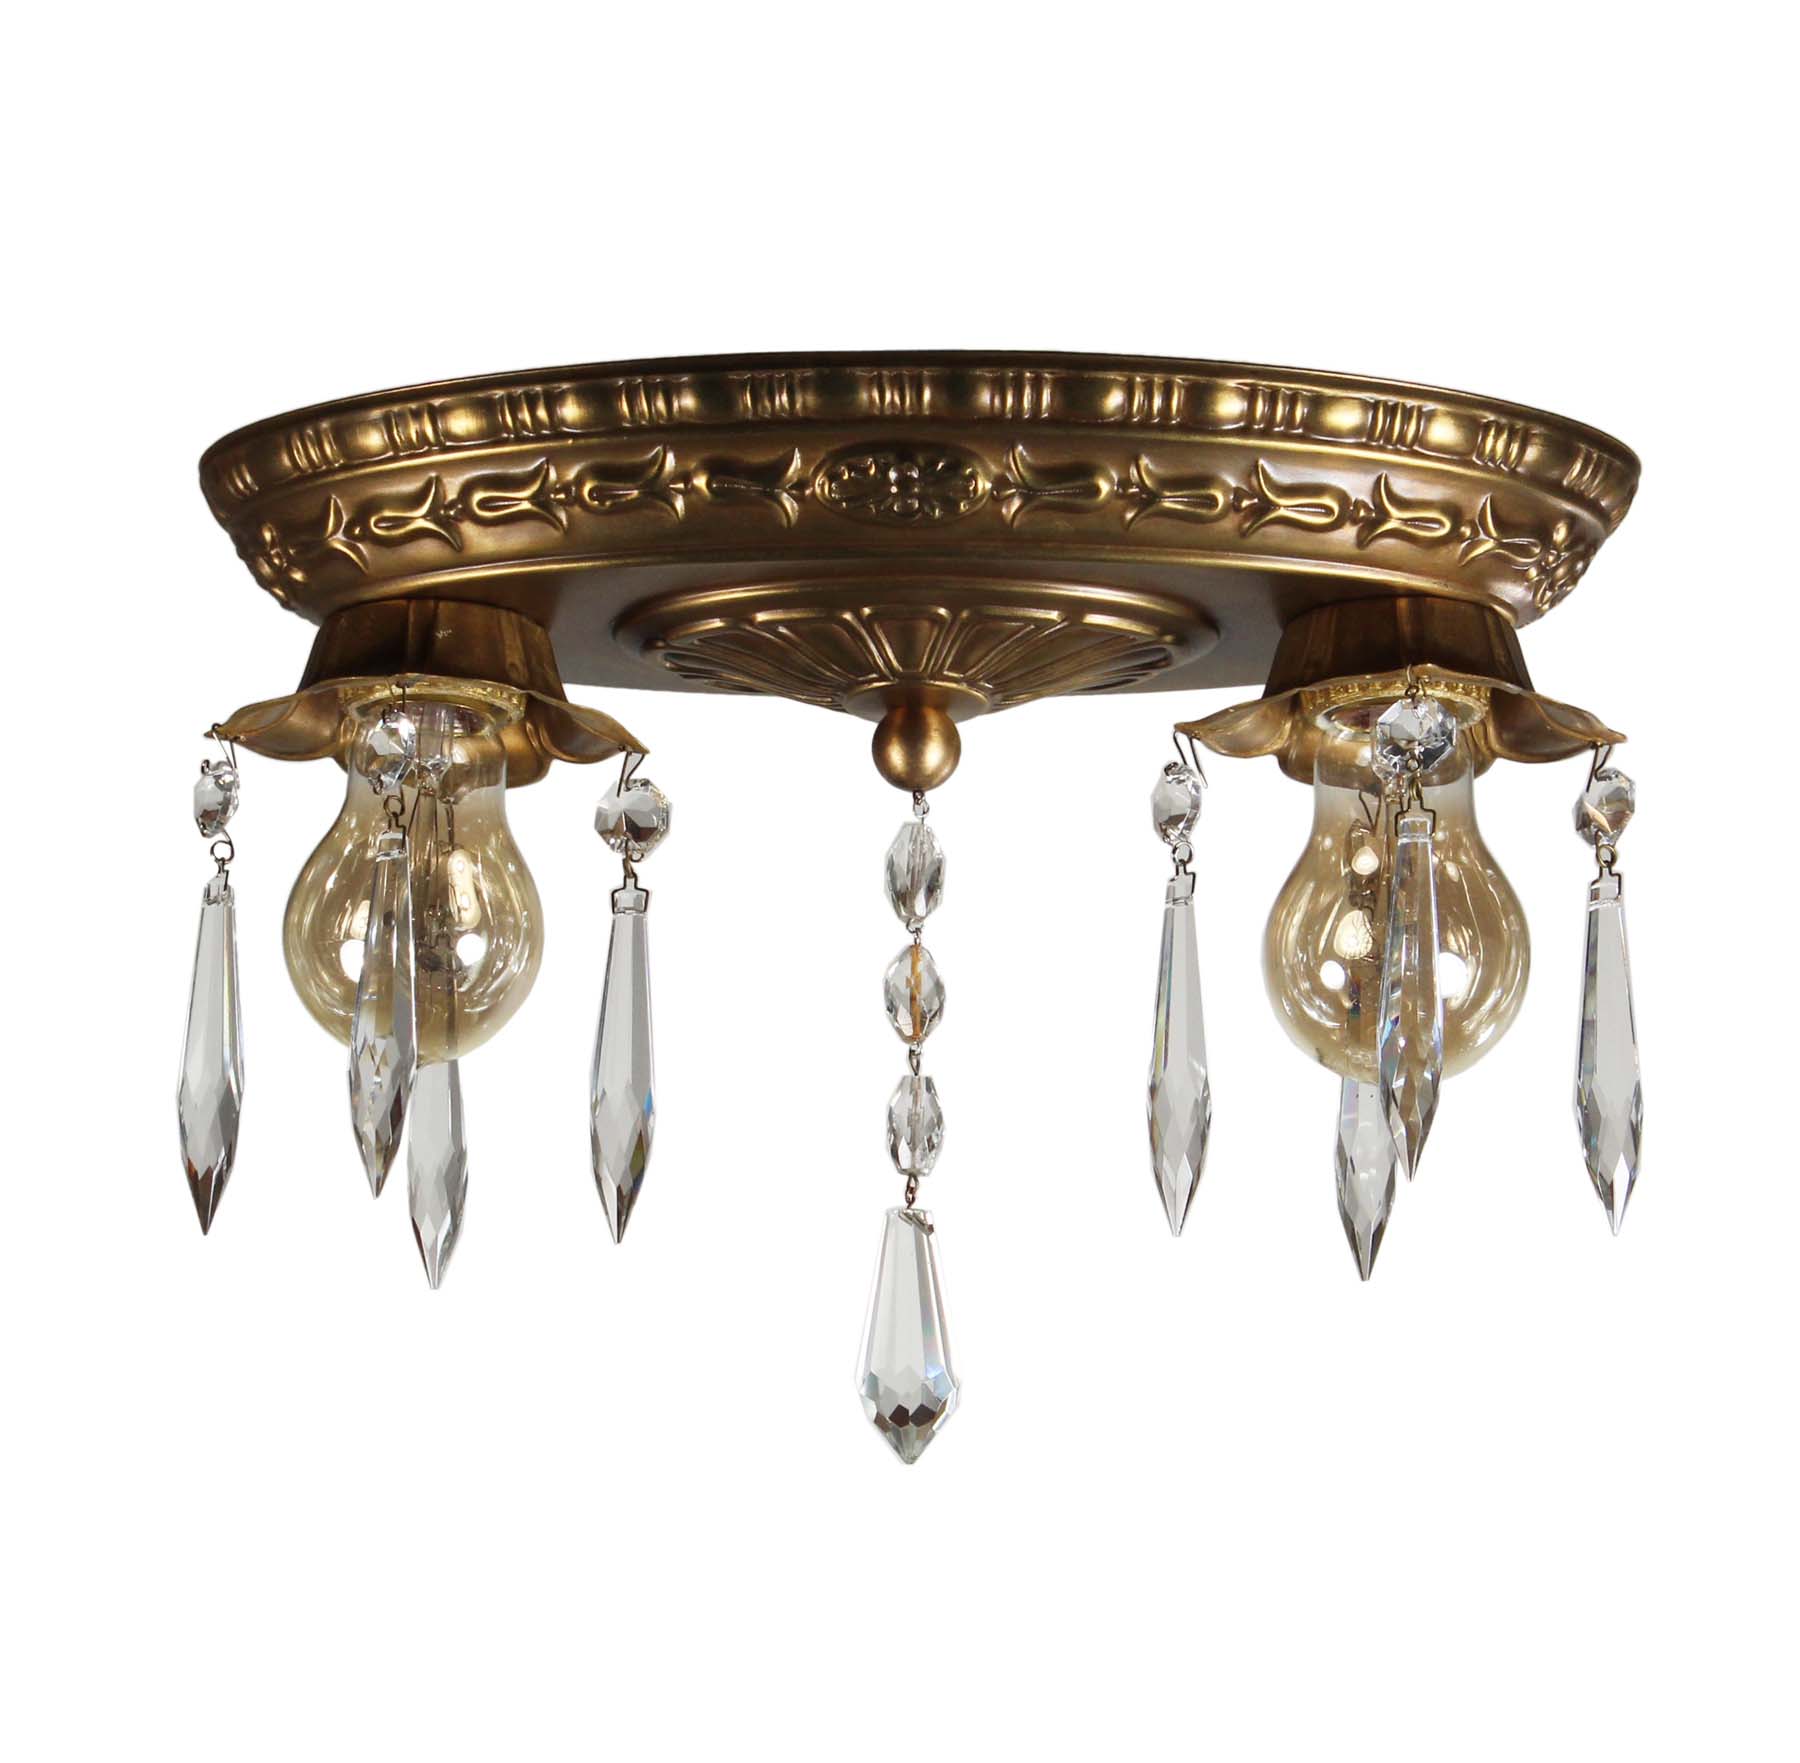 SOLD Antique Neoclassical Flush Mount Fixture with Prisms-0